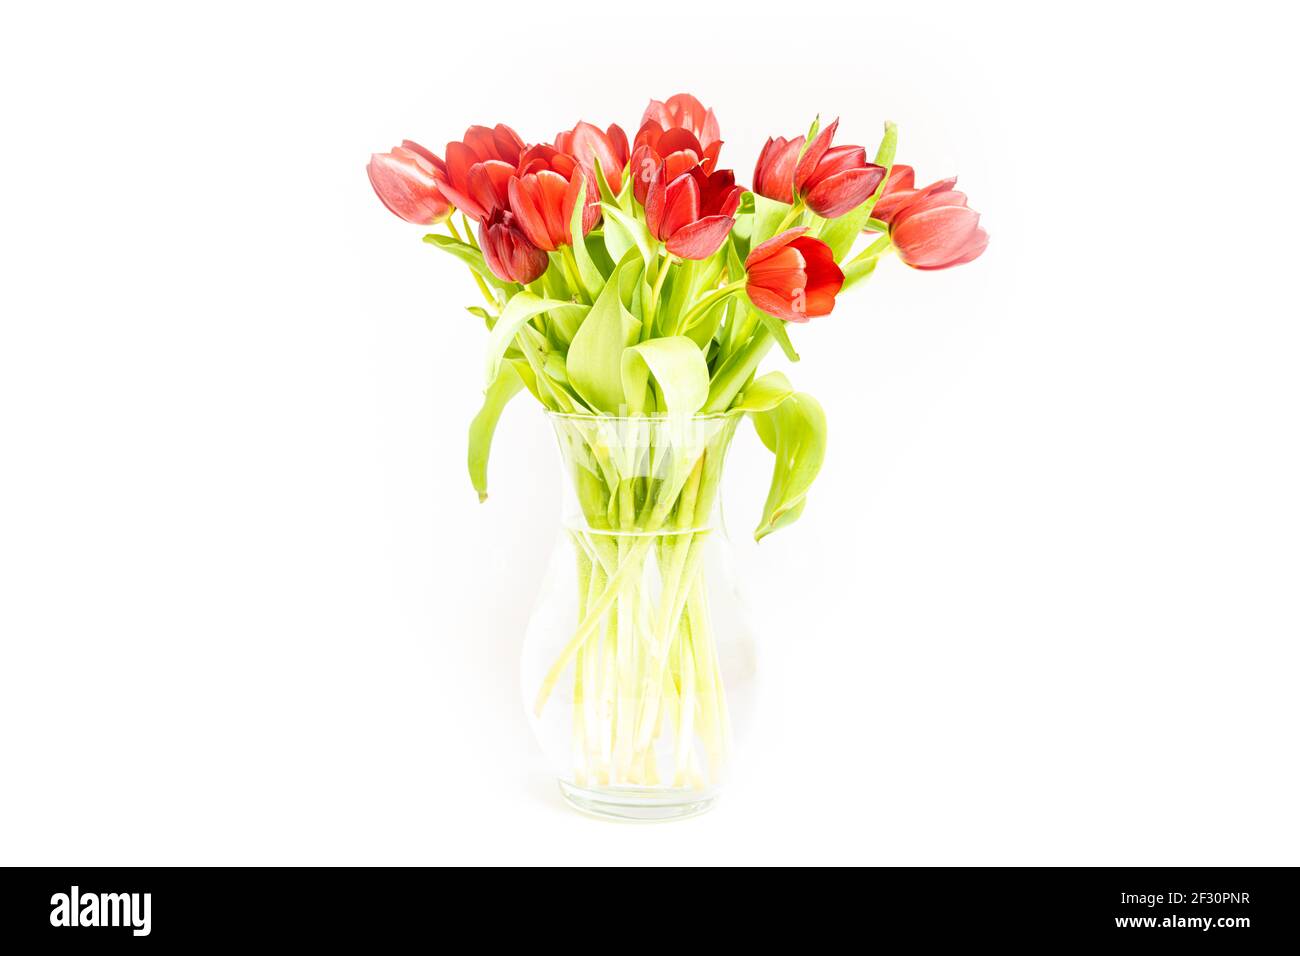 Red tulips bouquet on a white background, high key Stock Photo